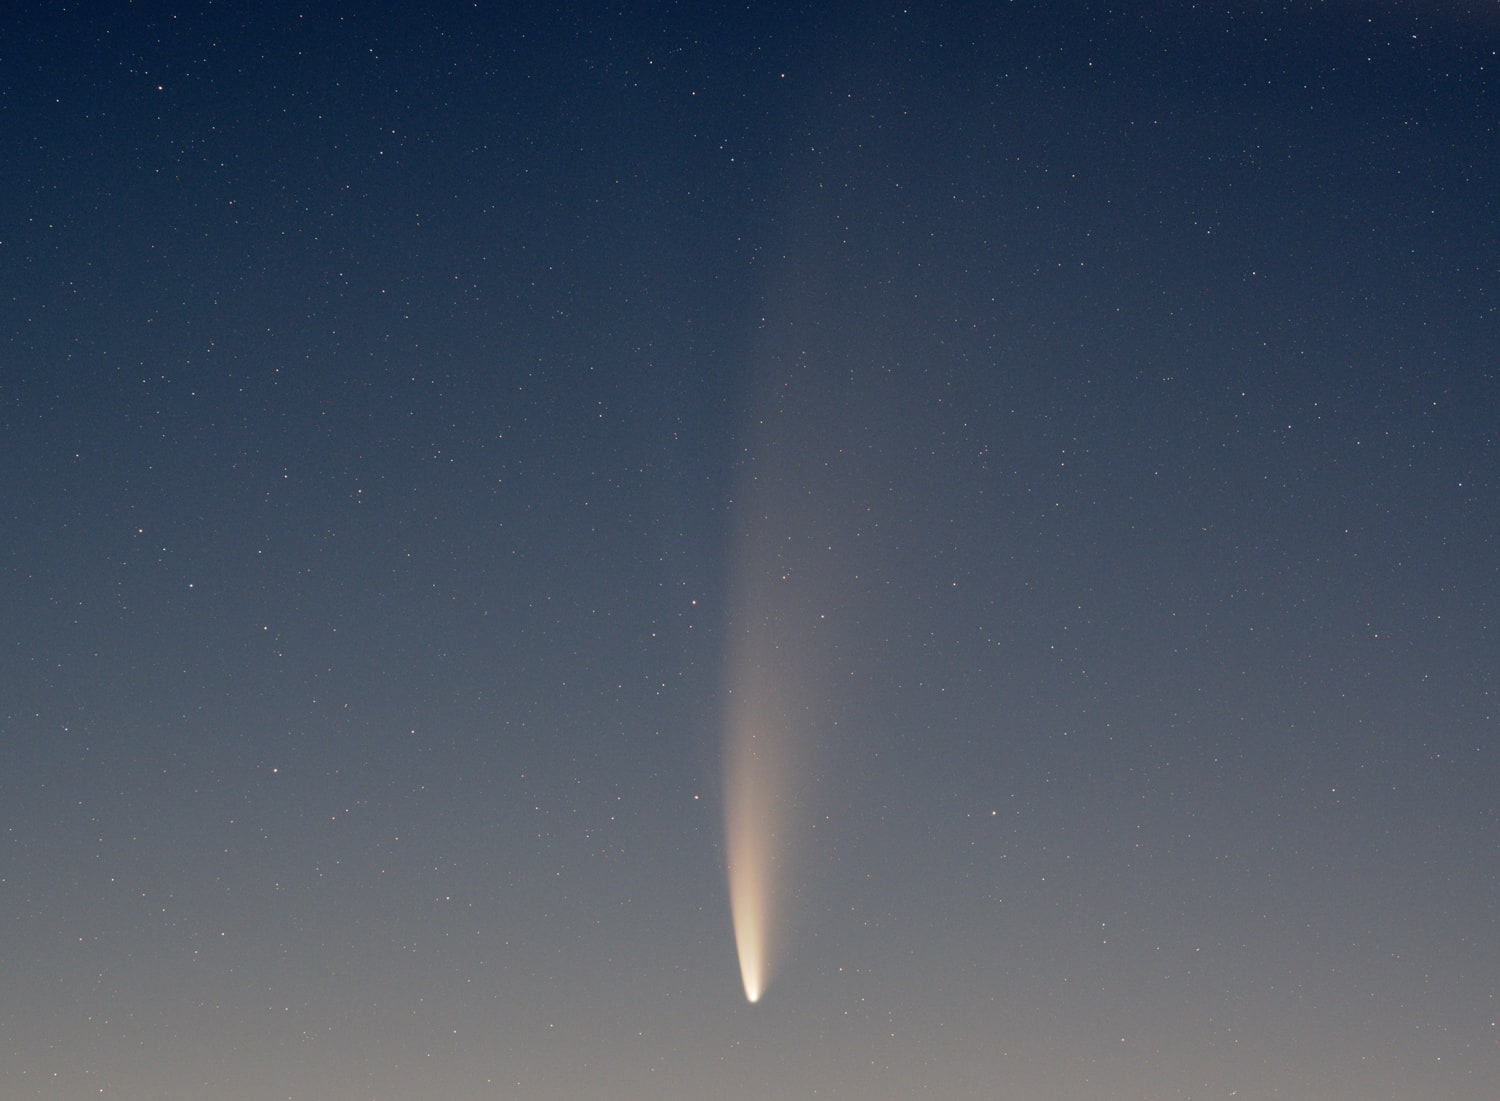 Here's a picture I took of Comet NEOWISE with a 135mm camera lens. The tail is huge!